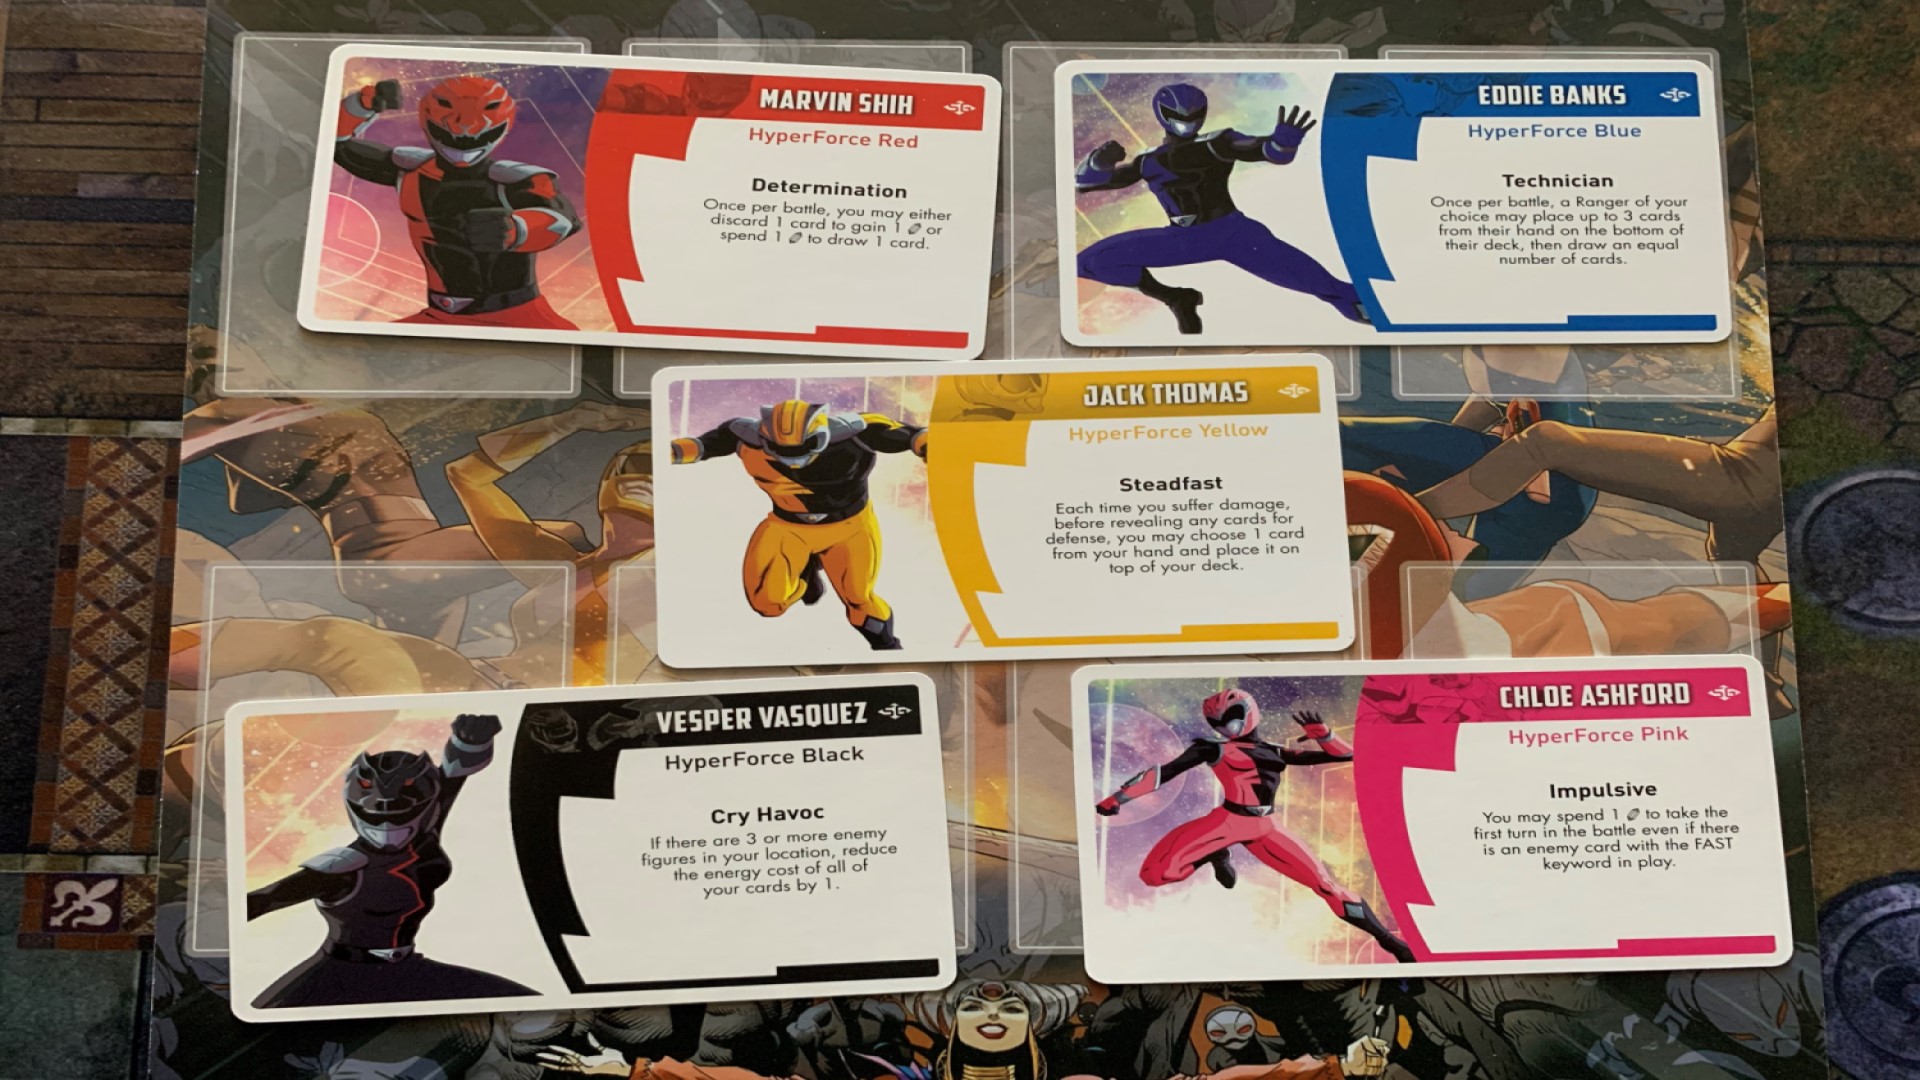 The Hyperforce Rangers' Character Cards on Display